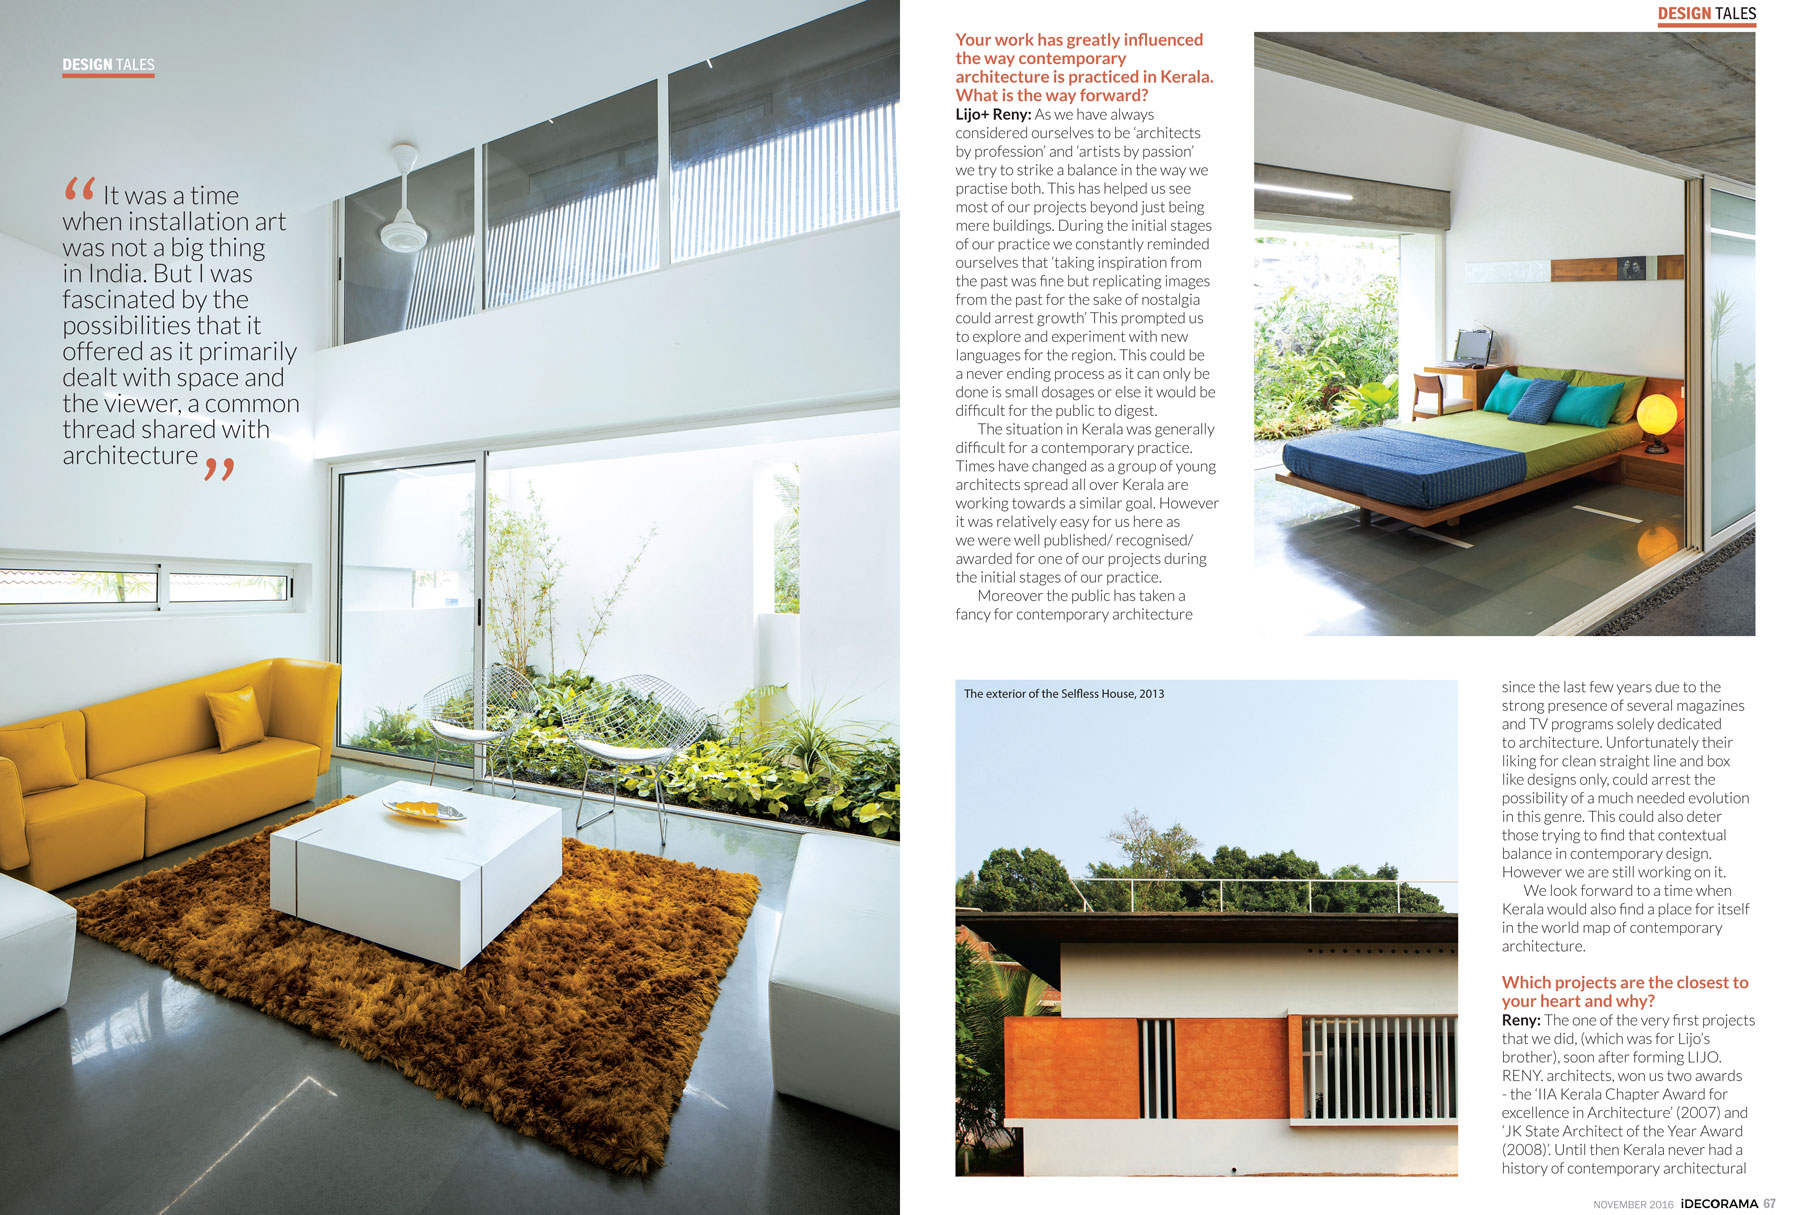 idecorama-magazine-india-interviews-lijo-reny-architects-for-their-cover-story-design-tales-4